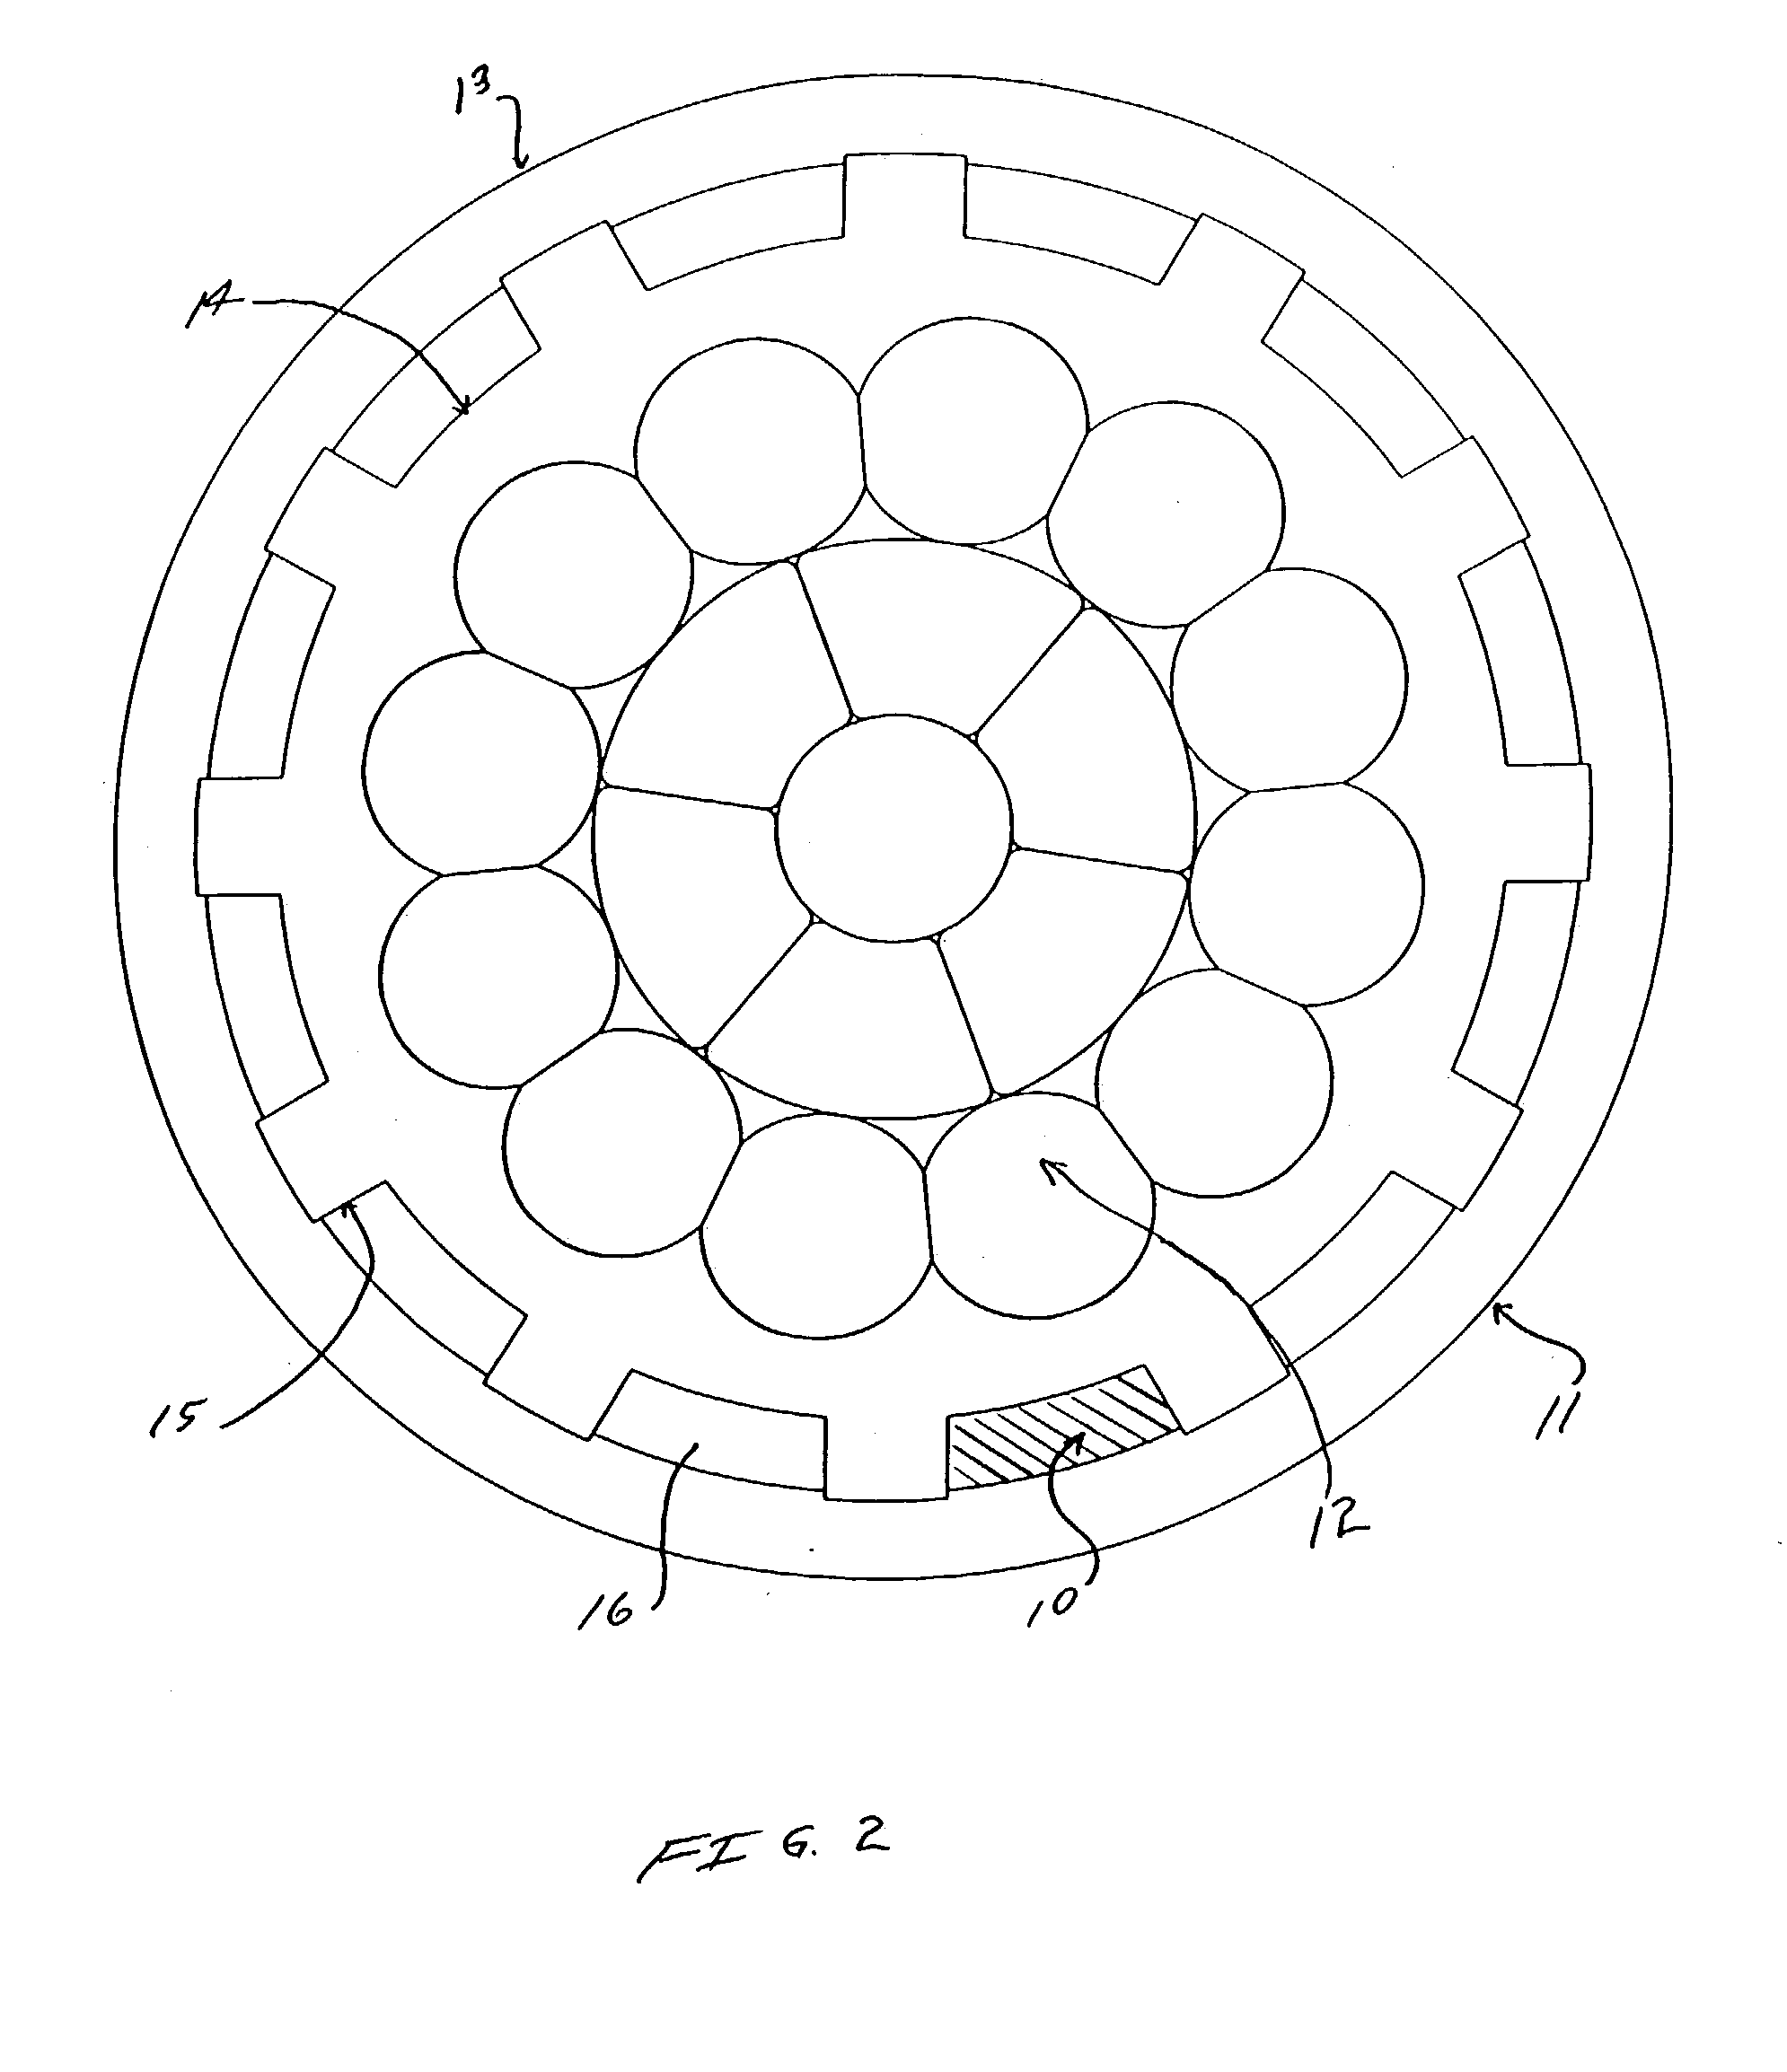 Self-sealing electrical cable having a finned or ribbed structure between protective layers